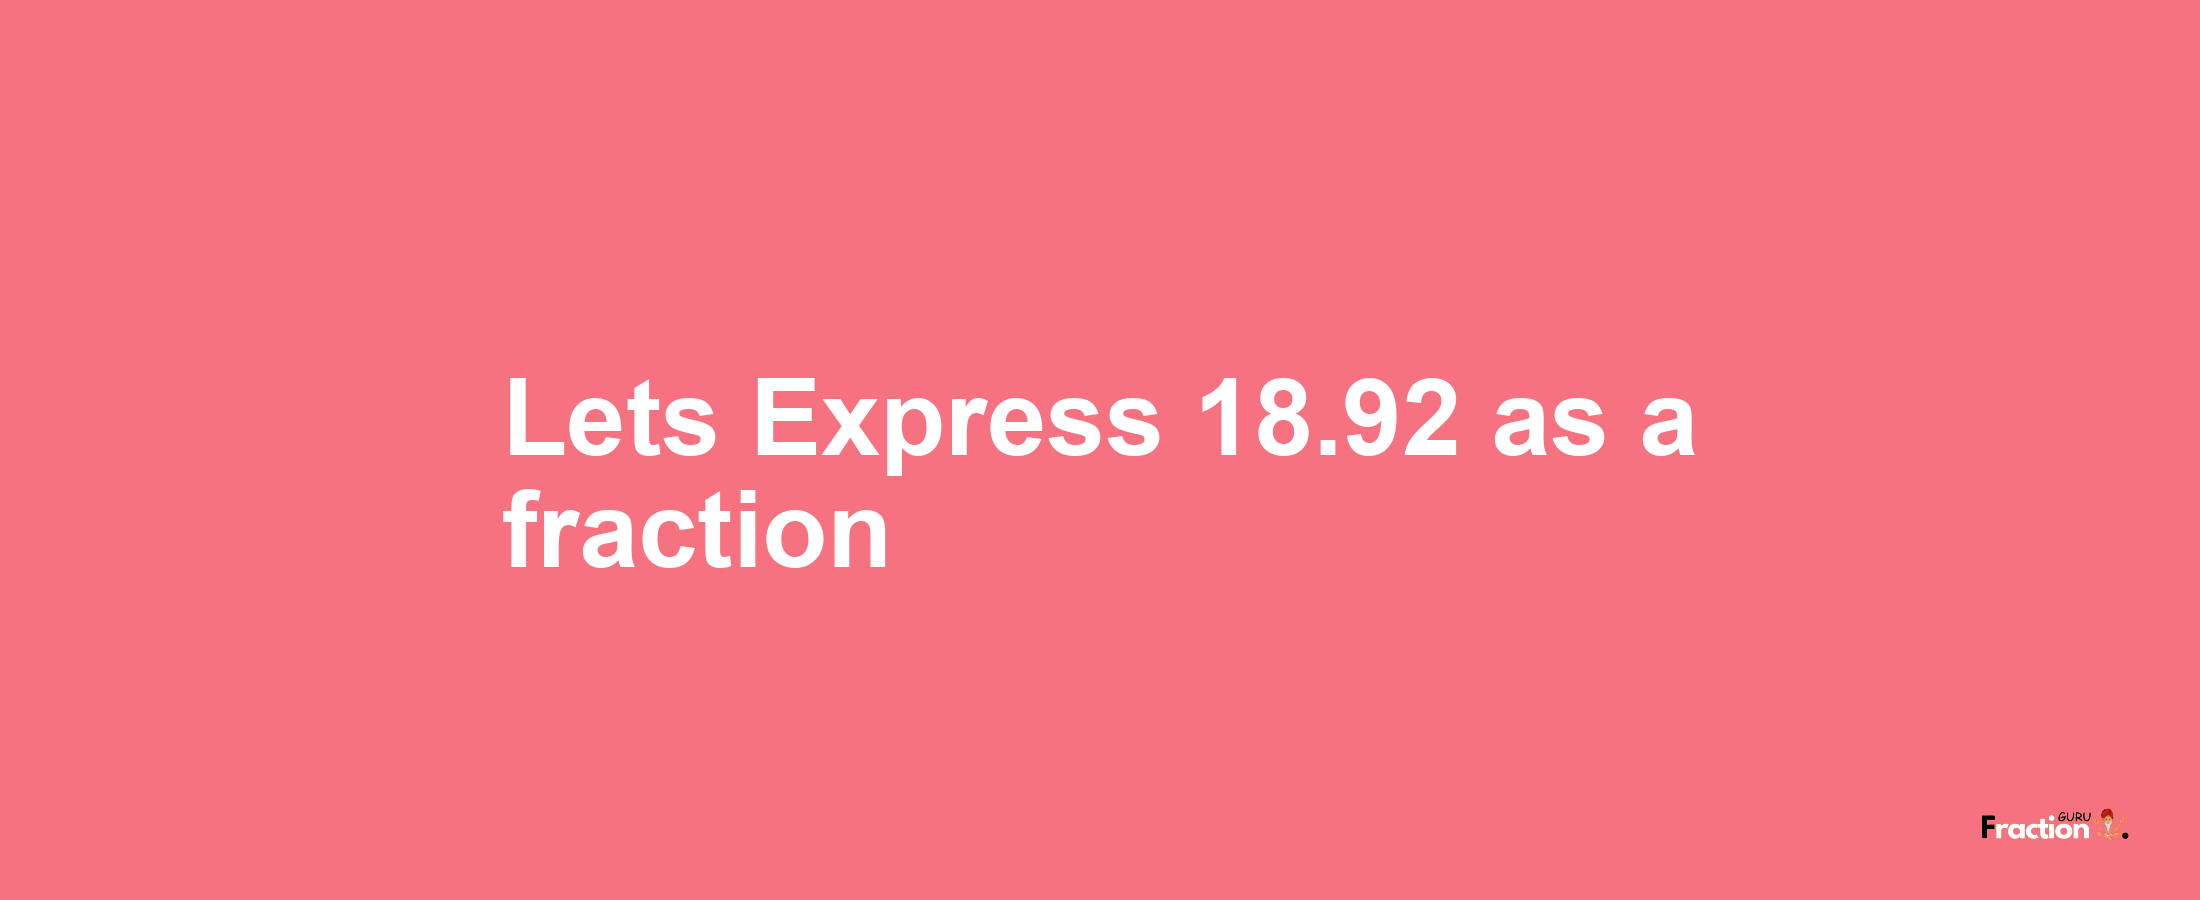 Lets Express 18.92 as afraction